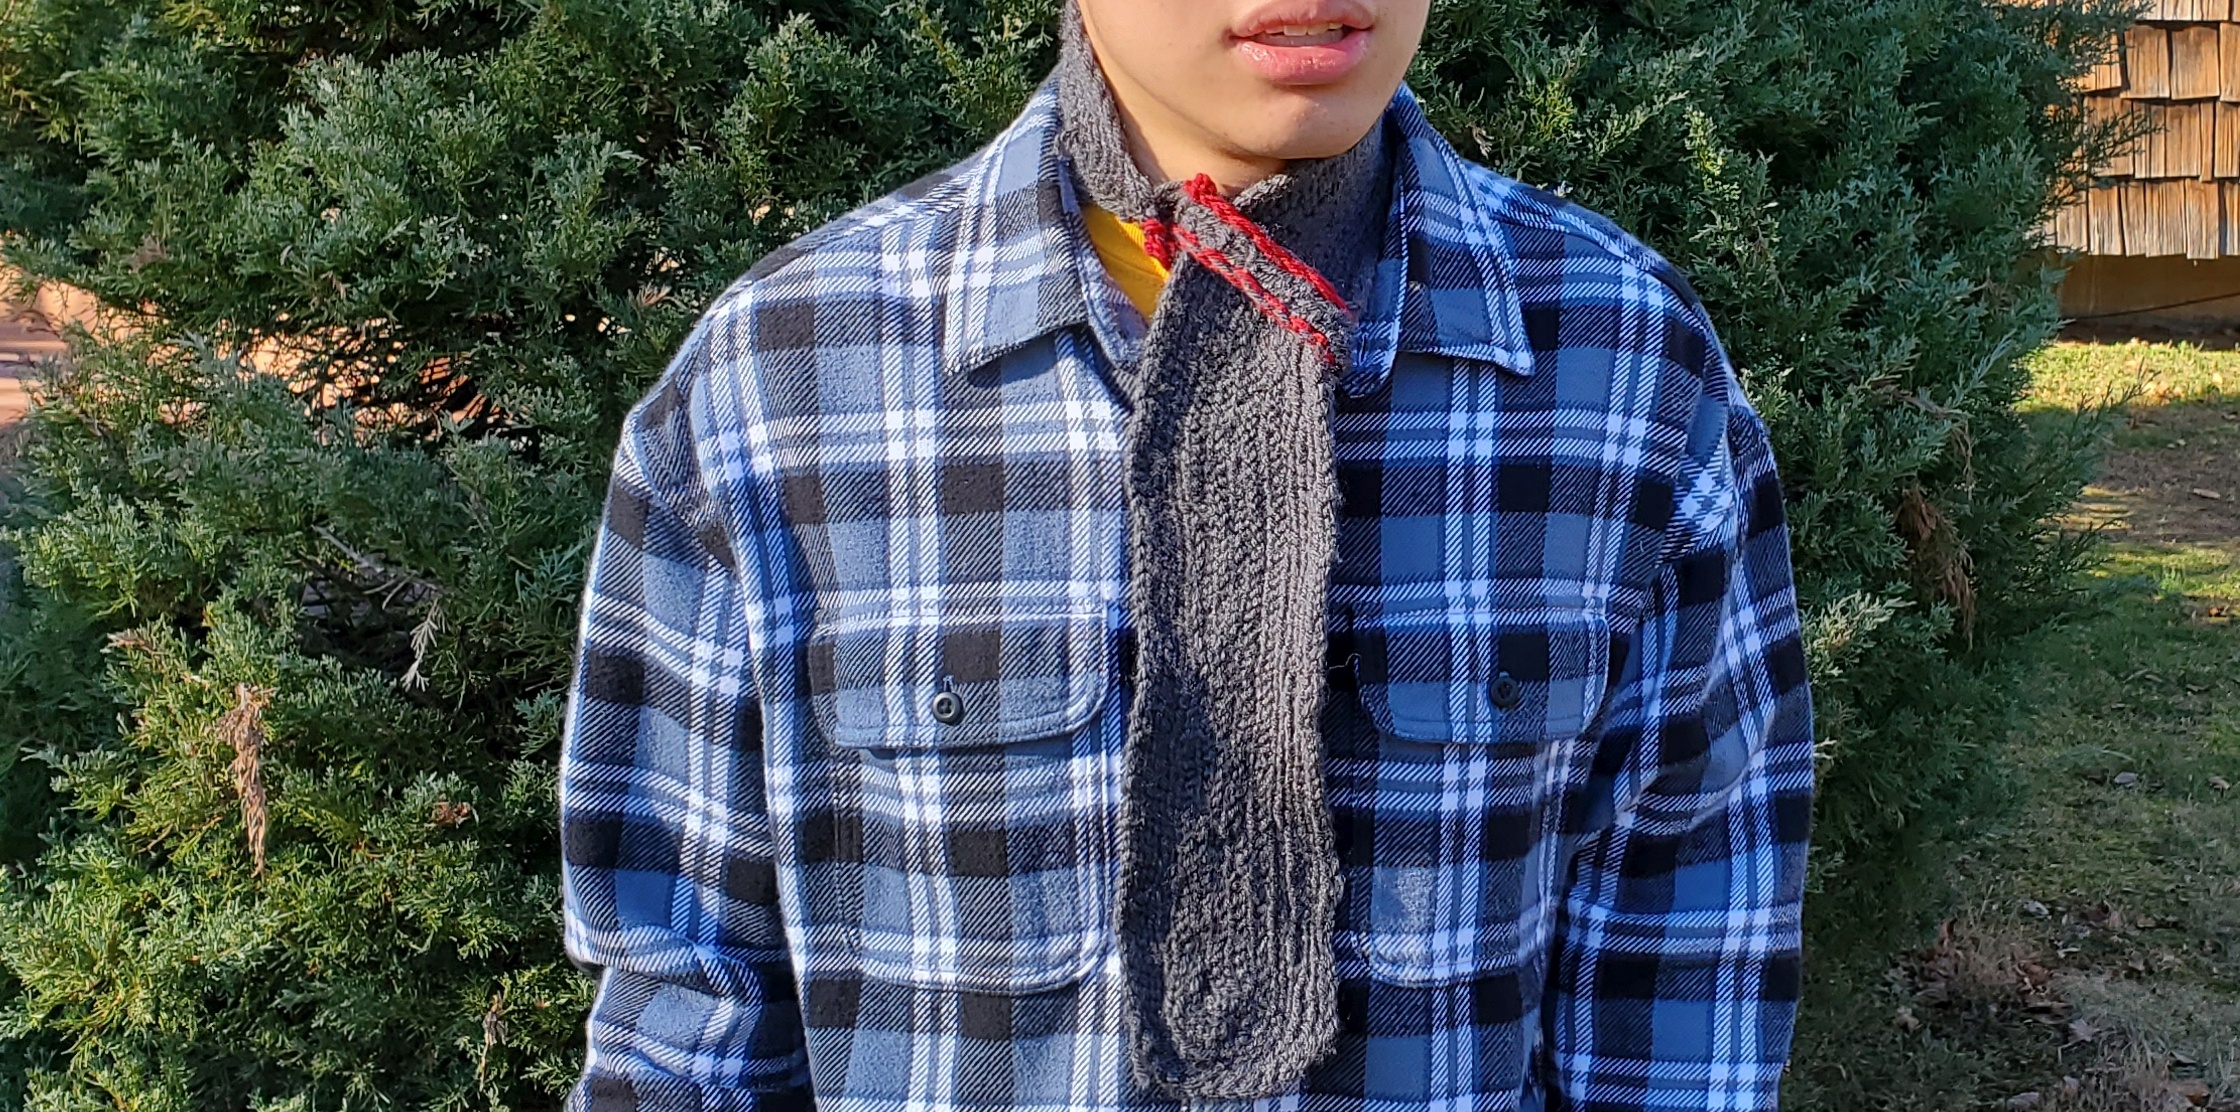 A picture of me wearing the scarf